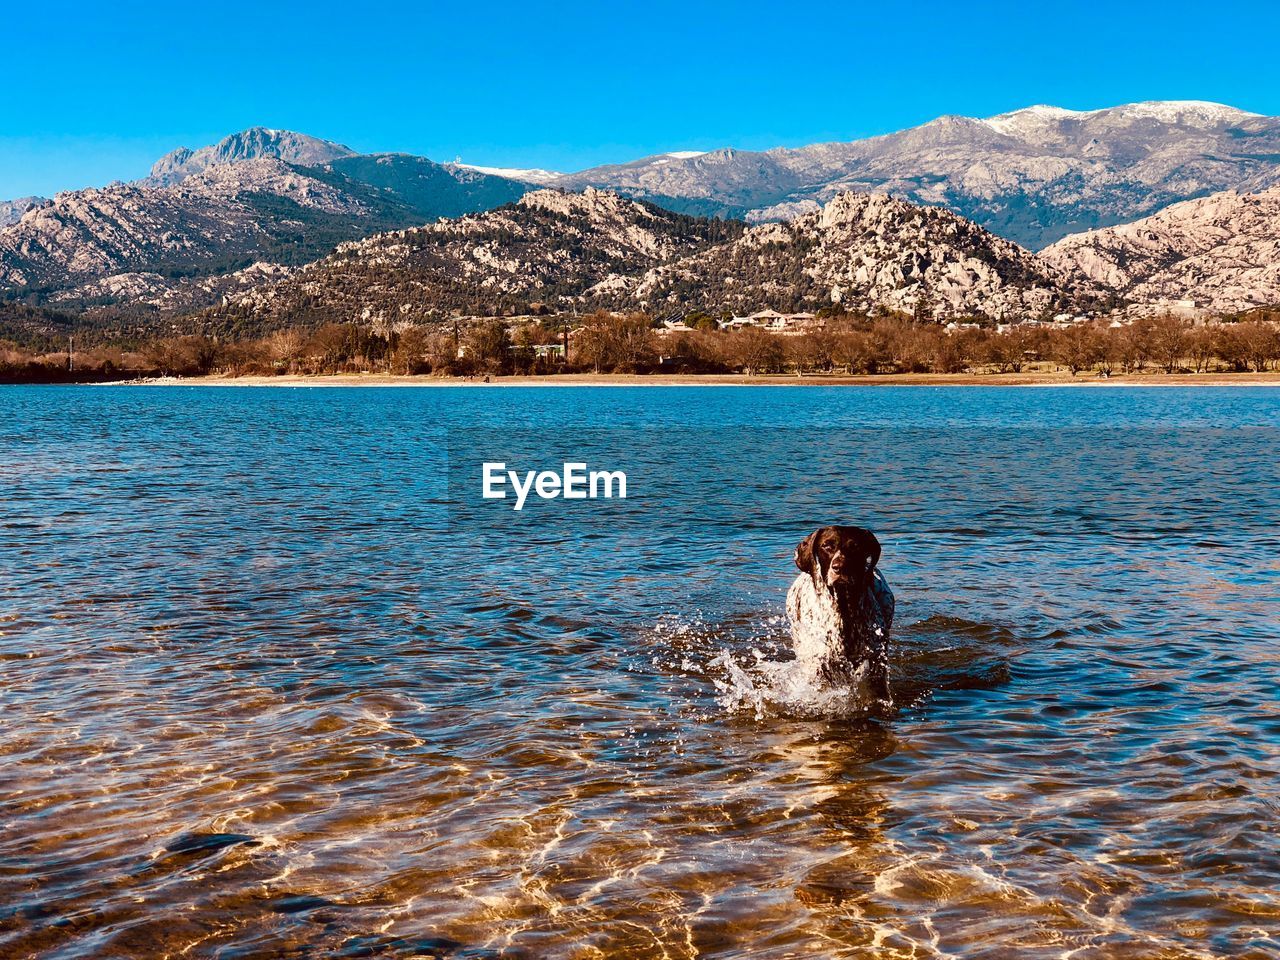 DOG SWIMMING IN LAKE AGAINST MOUNTAINS